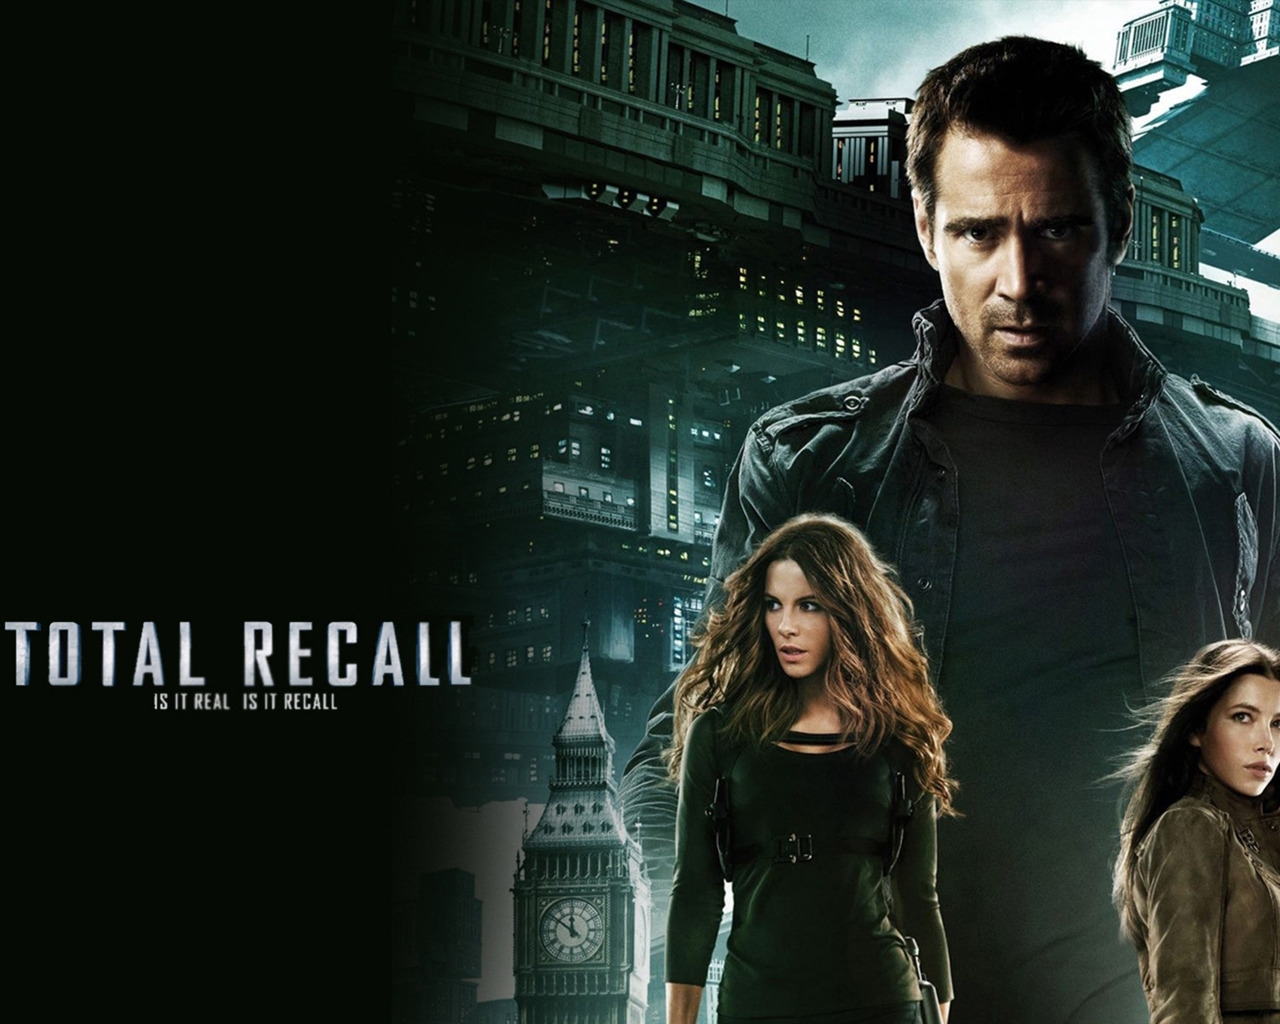 Total Recall Poster for 1280 x 1024 resolution